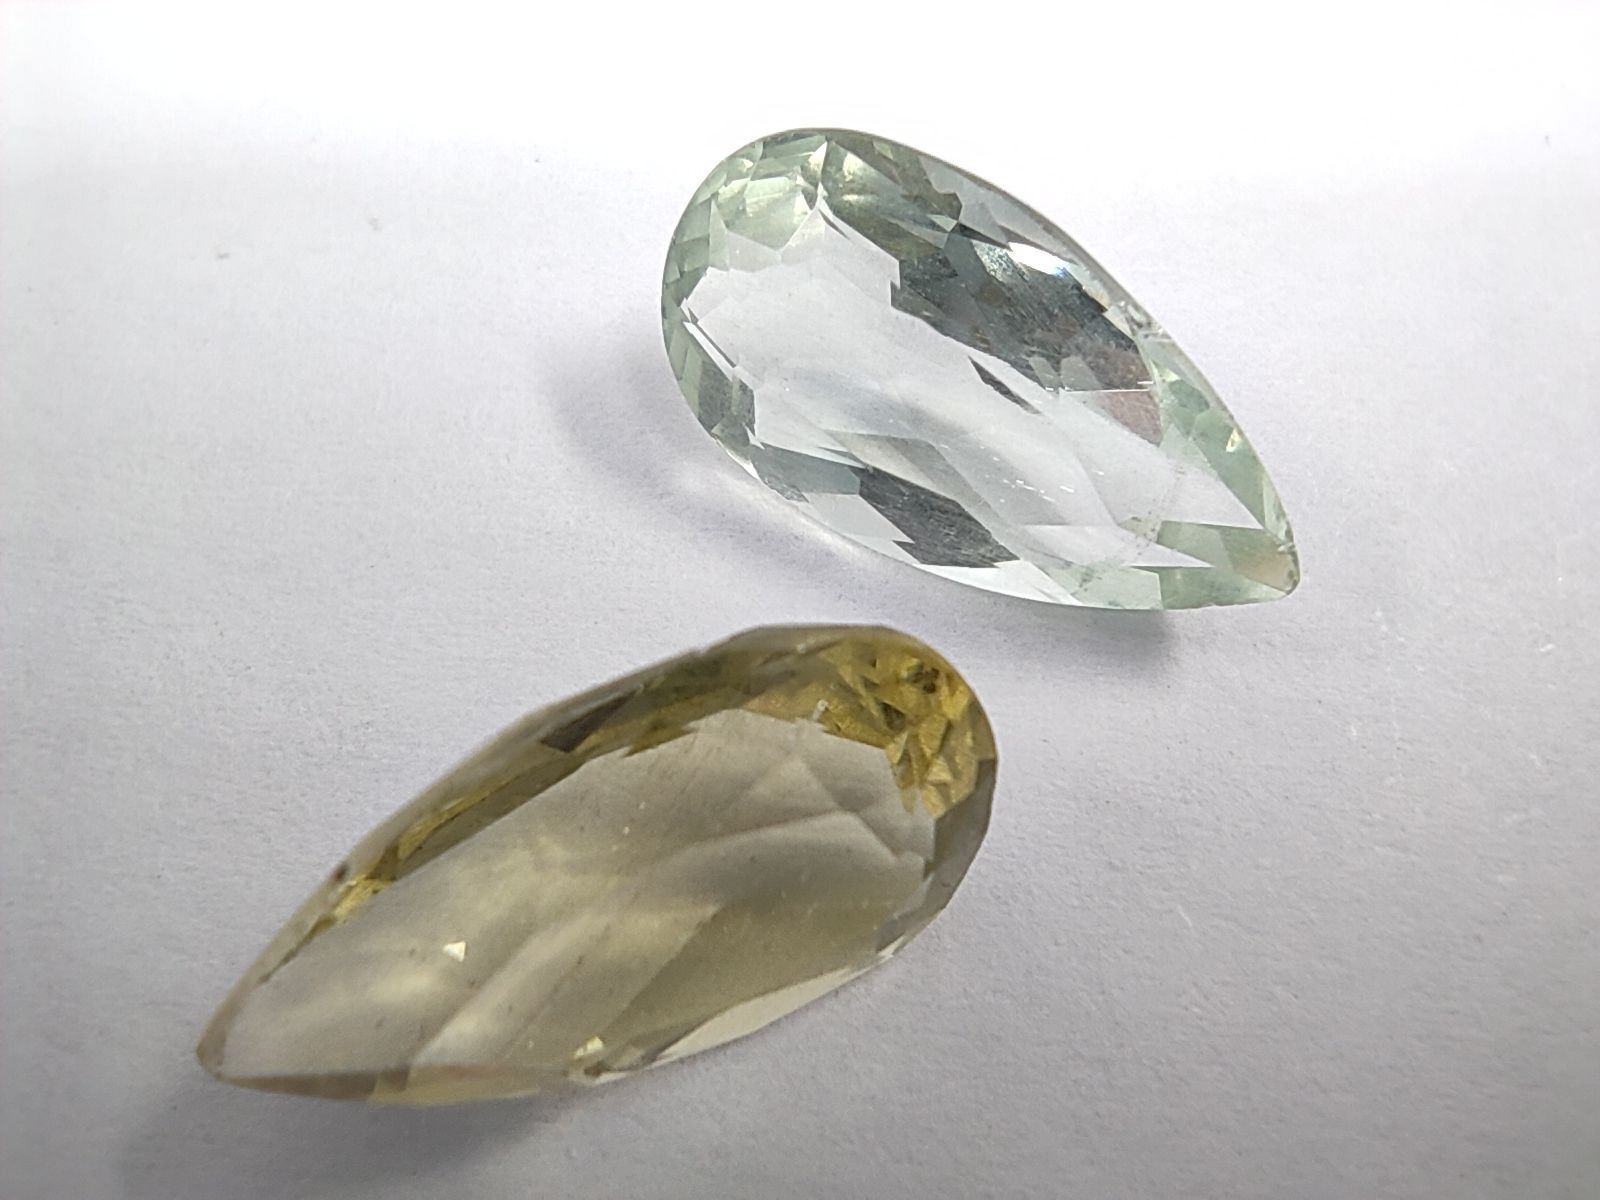 Null TWO yellow and blue green pear beryls


Weight : 8,65 cts 


Origin : Madag&hellip;